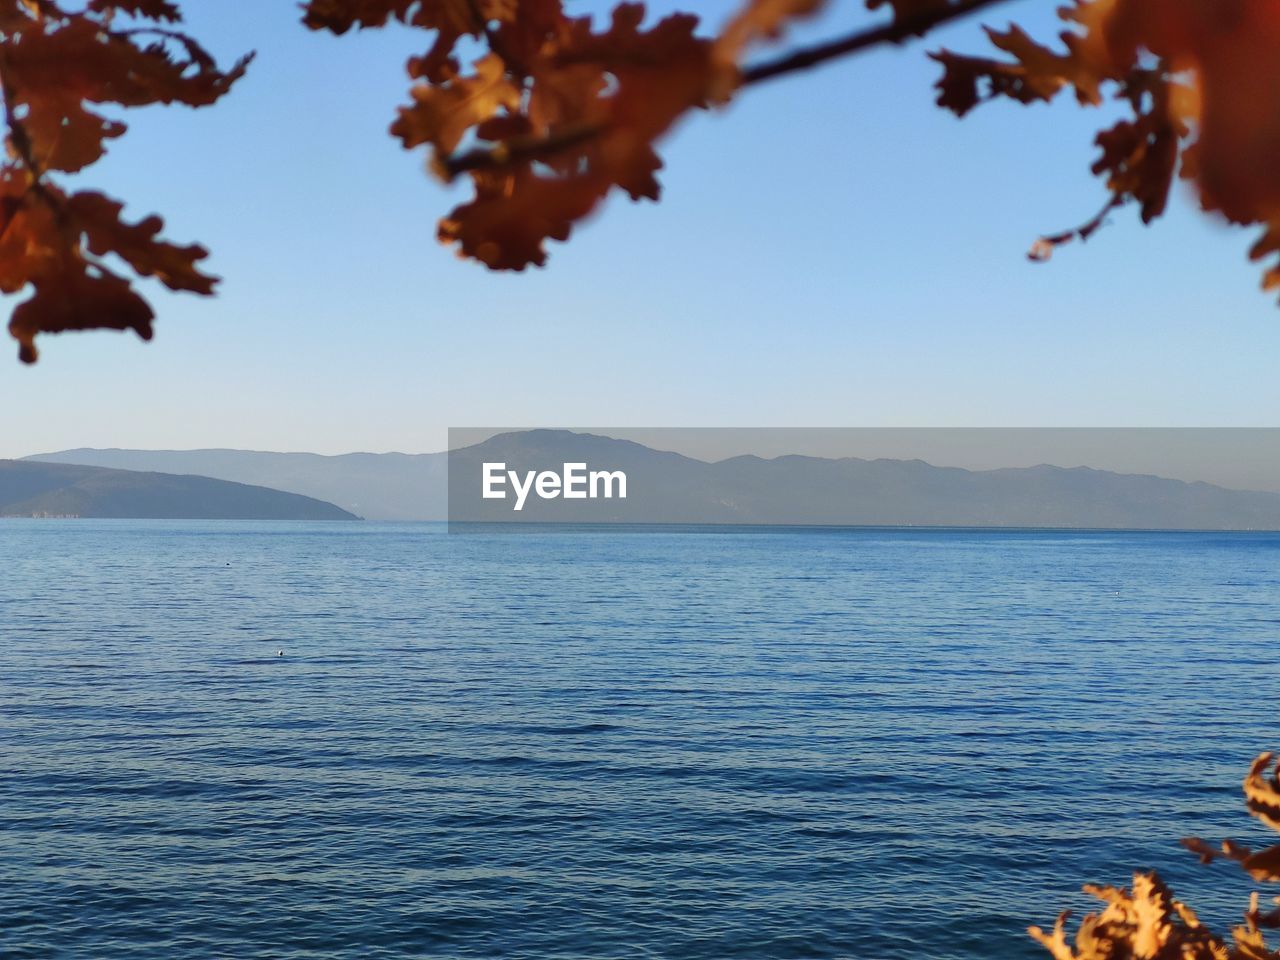 SCENIC VIEW OF SEA BY MOUNTAINS AGAINST CLEAR SKY